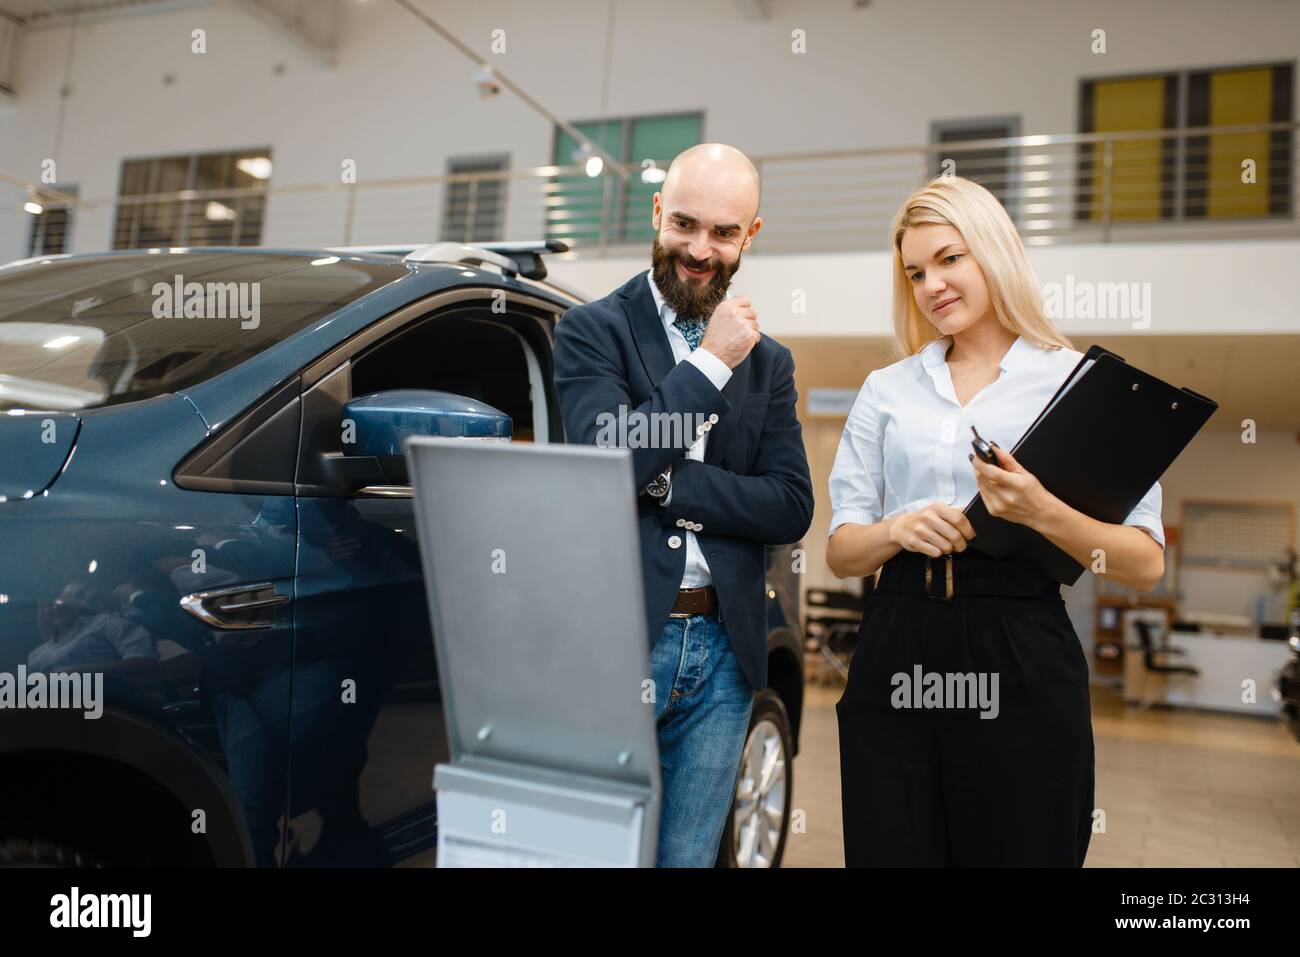 Smiling man and saleswoman in car dealership. Customer and seller in vehicle showroom, male person buying transport, auto dealer business Stock Photo